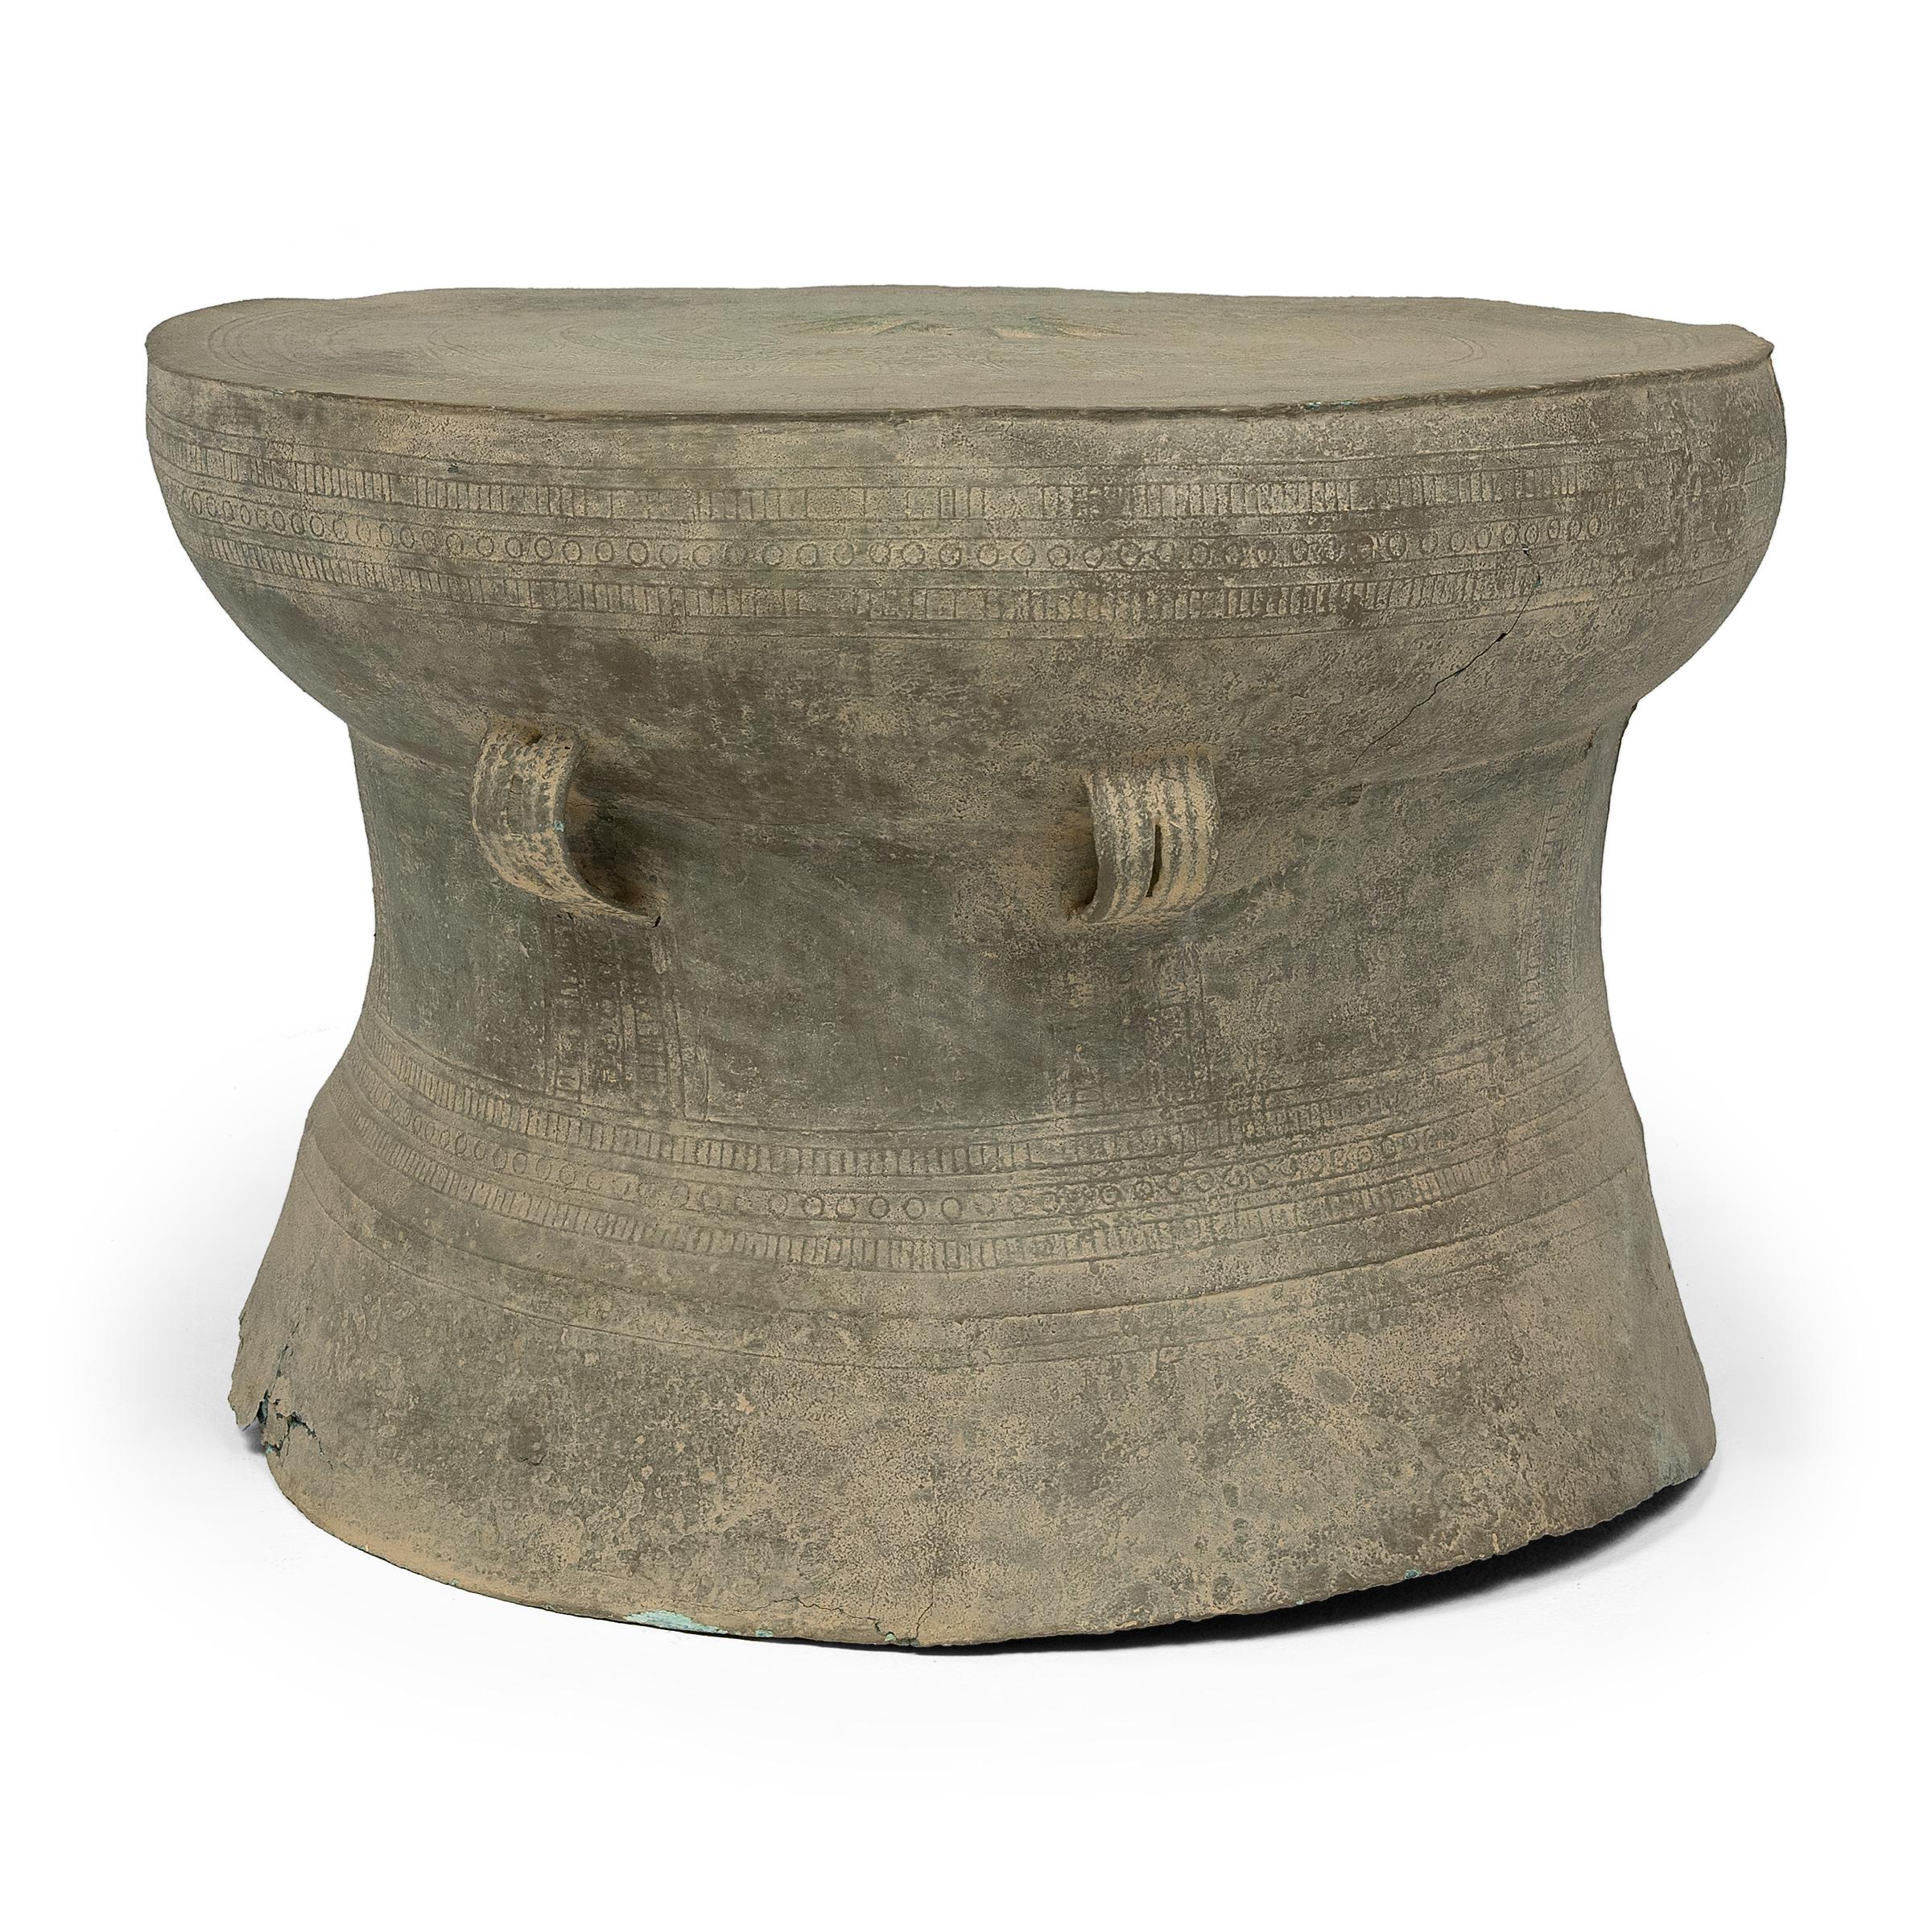 The bronze Dong Son drum is an iconic form that dates back to as early as 600 BCE. Found throughout southeast Asia, the earliest drums are attributed to the Dong Son culture of northern Vietnam and spread to nearby regions by means of trade and